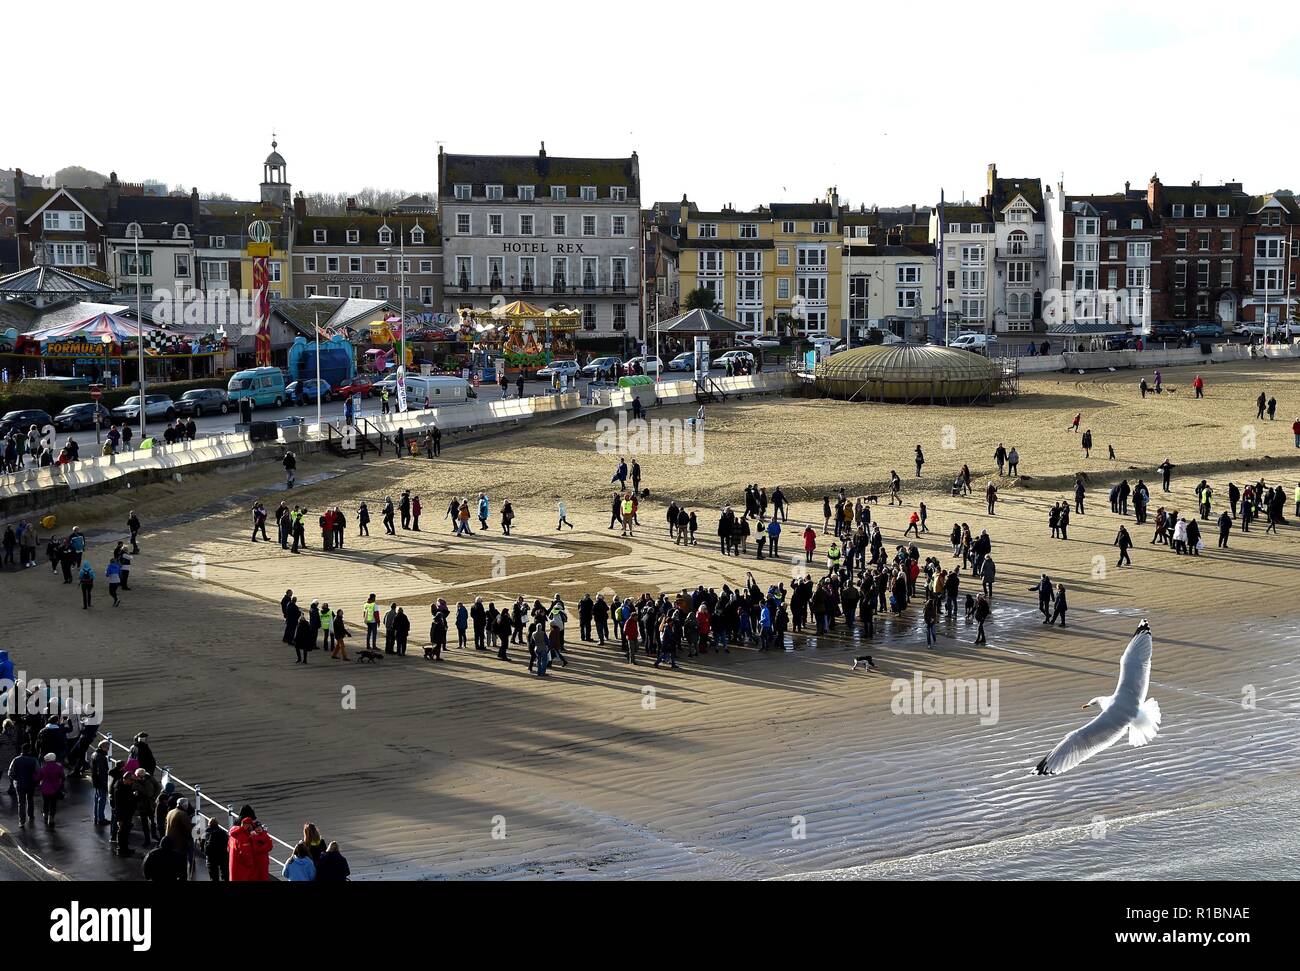 Pages of the Sea. Weymouth beach, Dorset, UK. 11th Nov, 2018. The face of Private Stanley McDougall etched onto the shore at Weymouth Beach as part of Pages of the Sea event, Dorset Credit: Finnbarr Webster/Alamy Live News Stock Photo